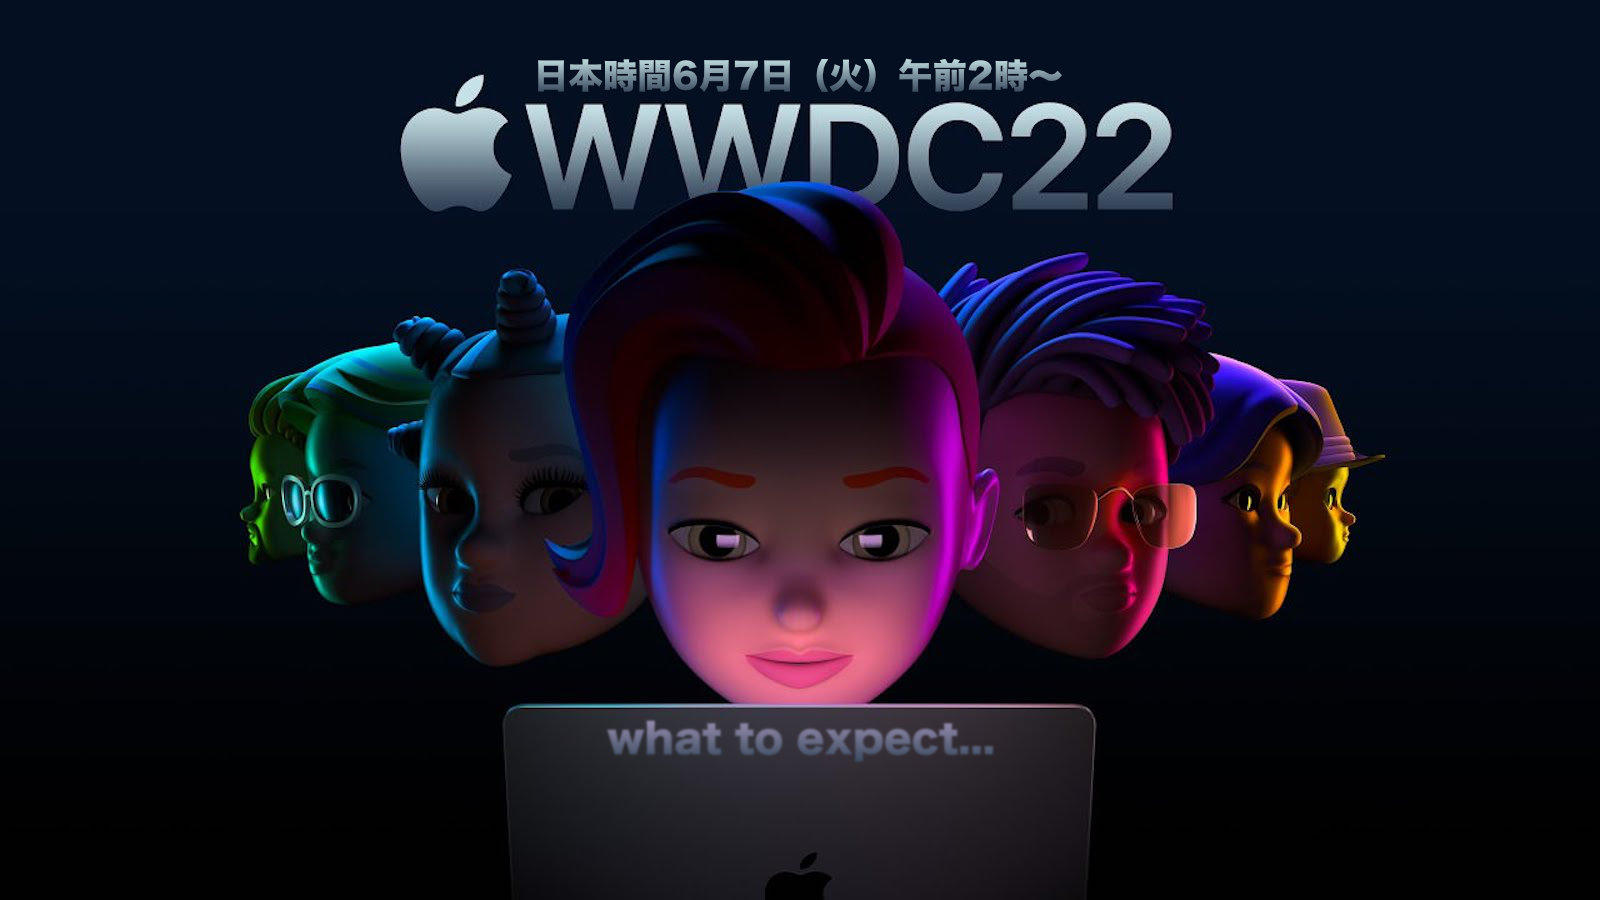 WWDC22 What to Expect at Keynote